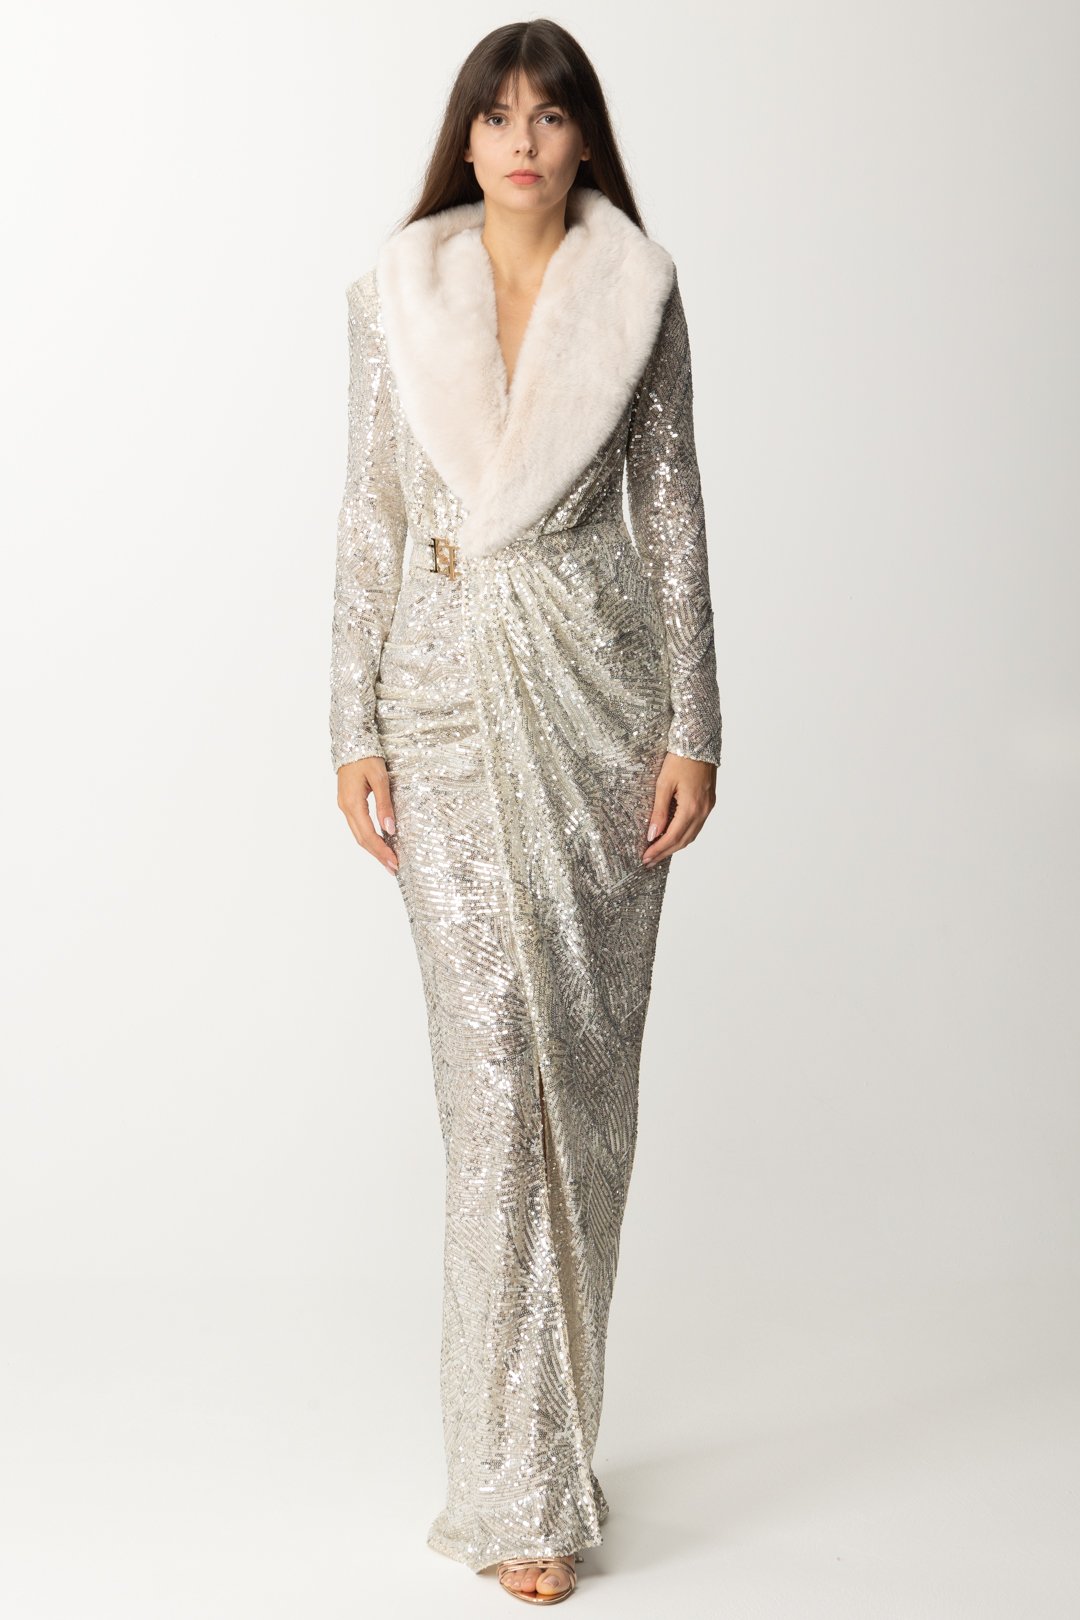 Preview: Elisabetta Franchi Red Carpet sequined dress with fur collar BURRO/SILVER